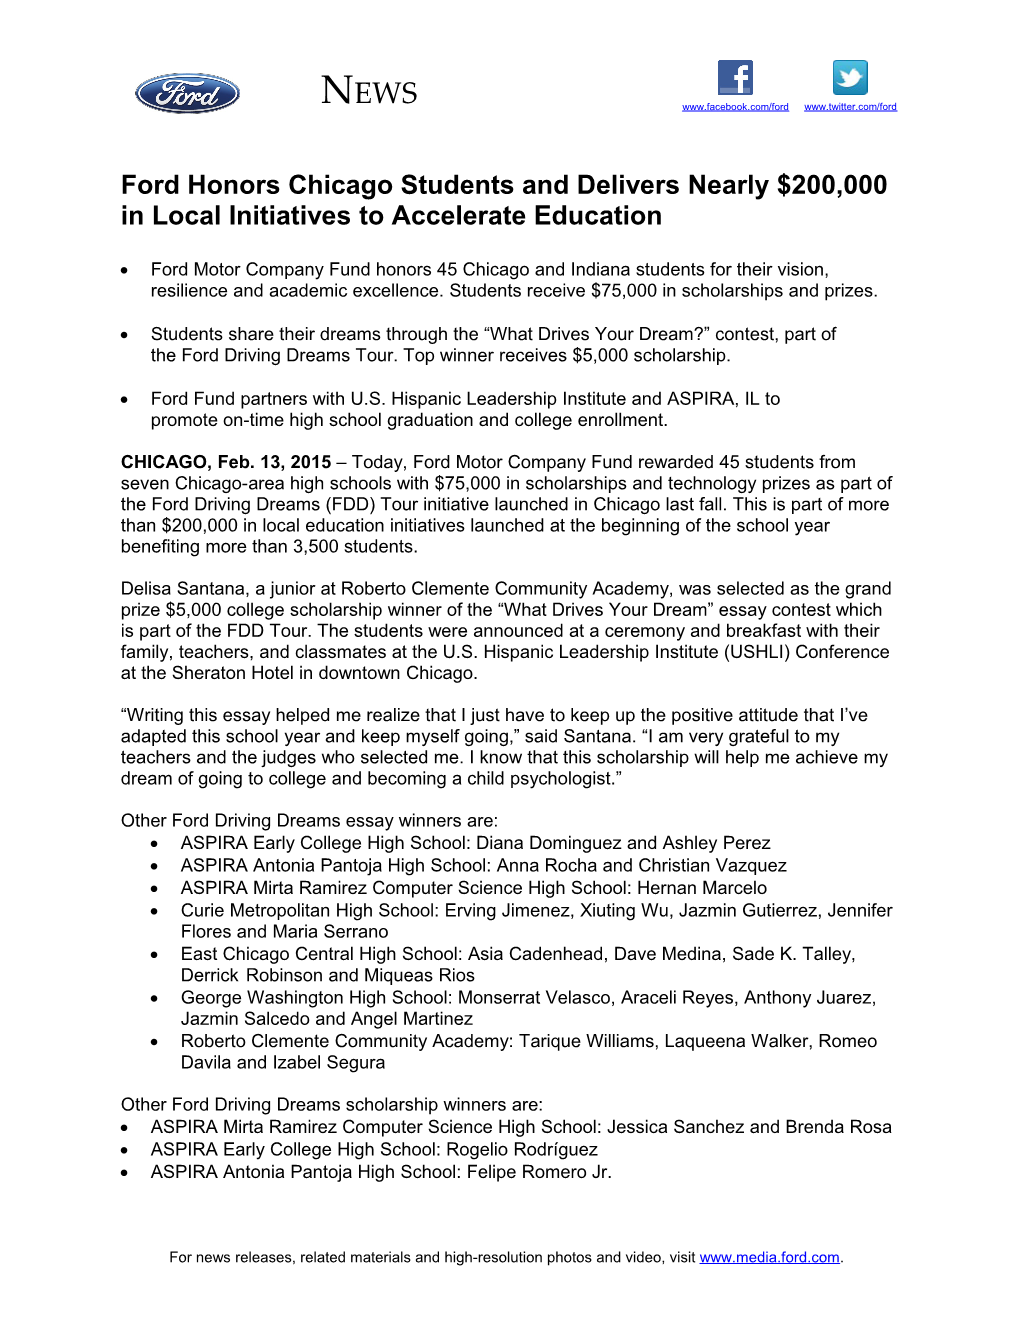 Ford Honors Chicago Students and Delivers Nearly $200,000 in Local Initiatives to Accelerate